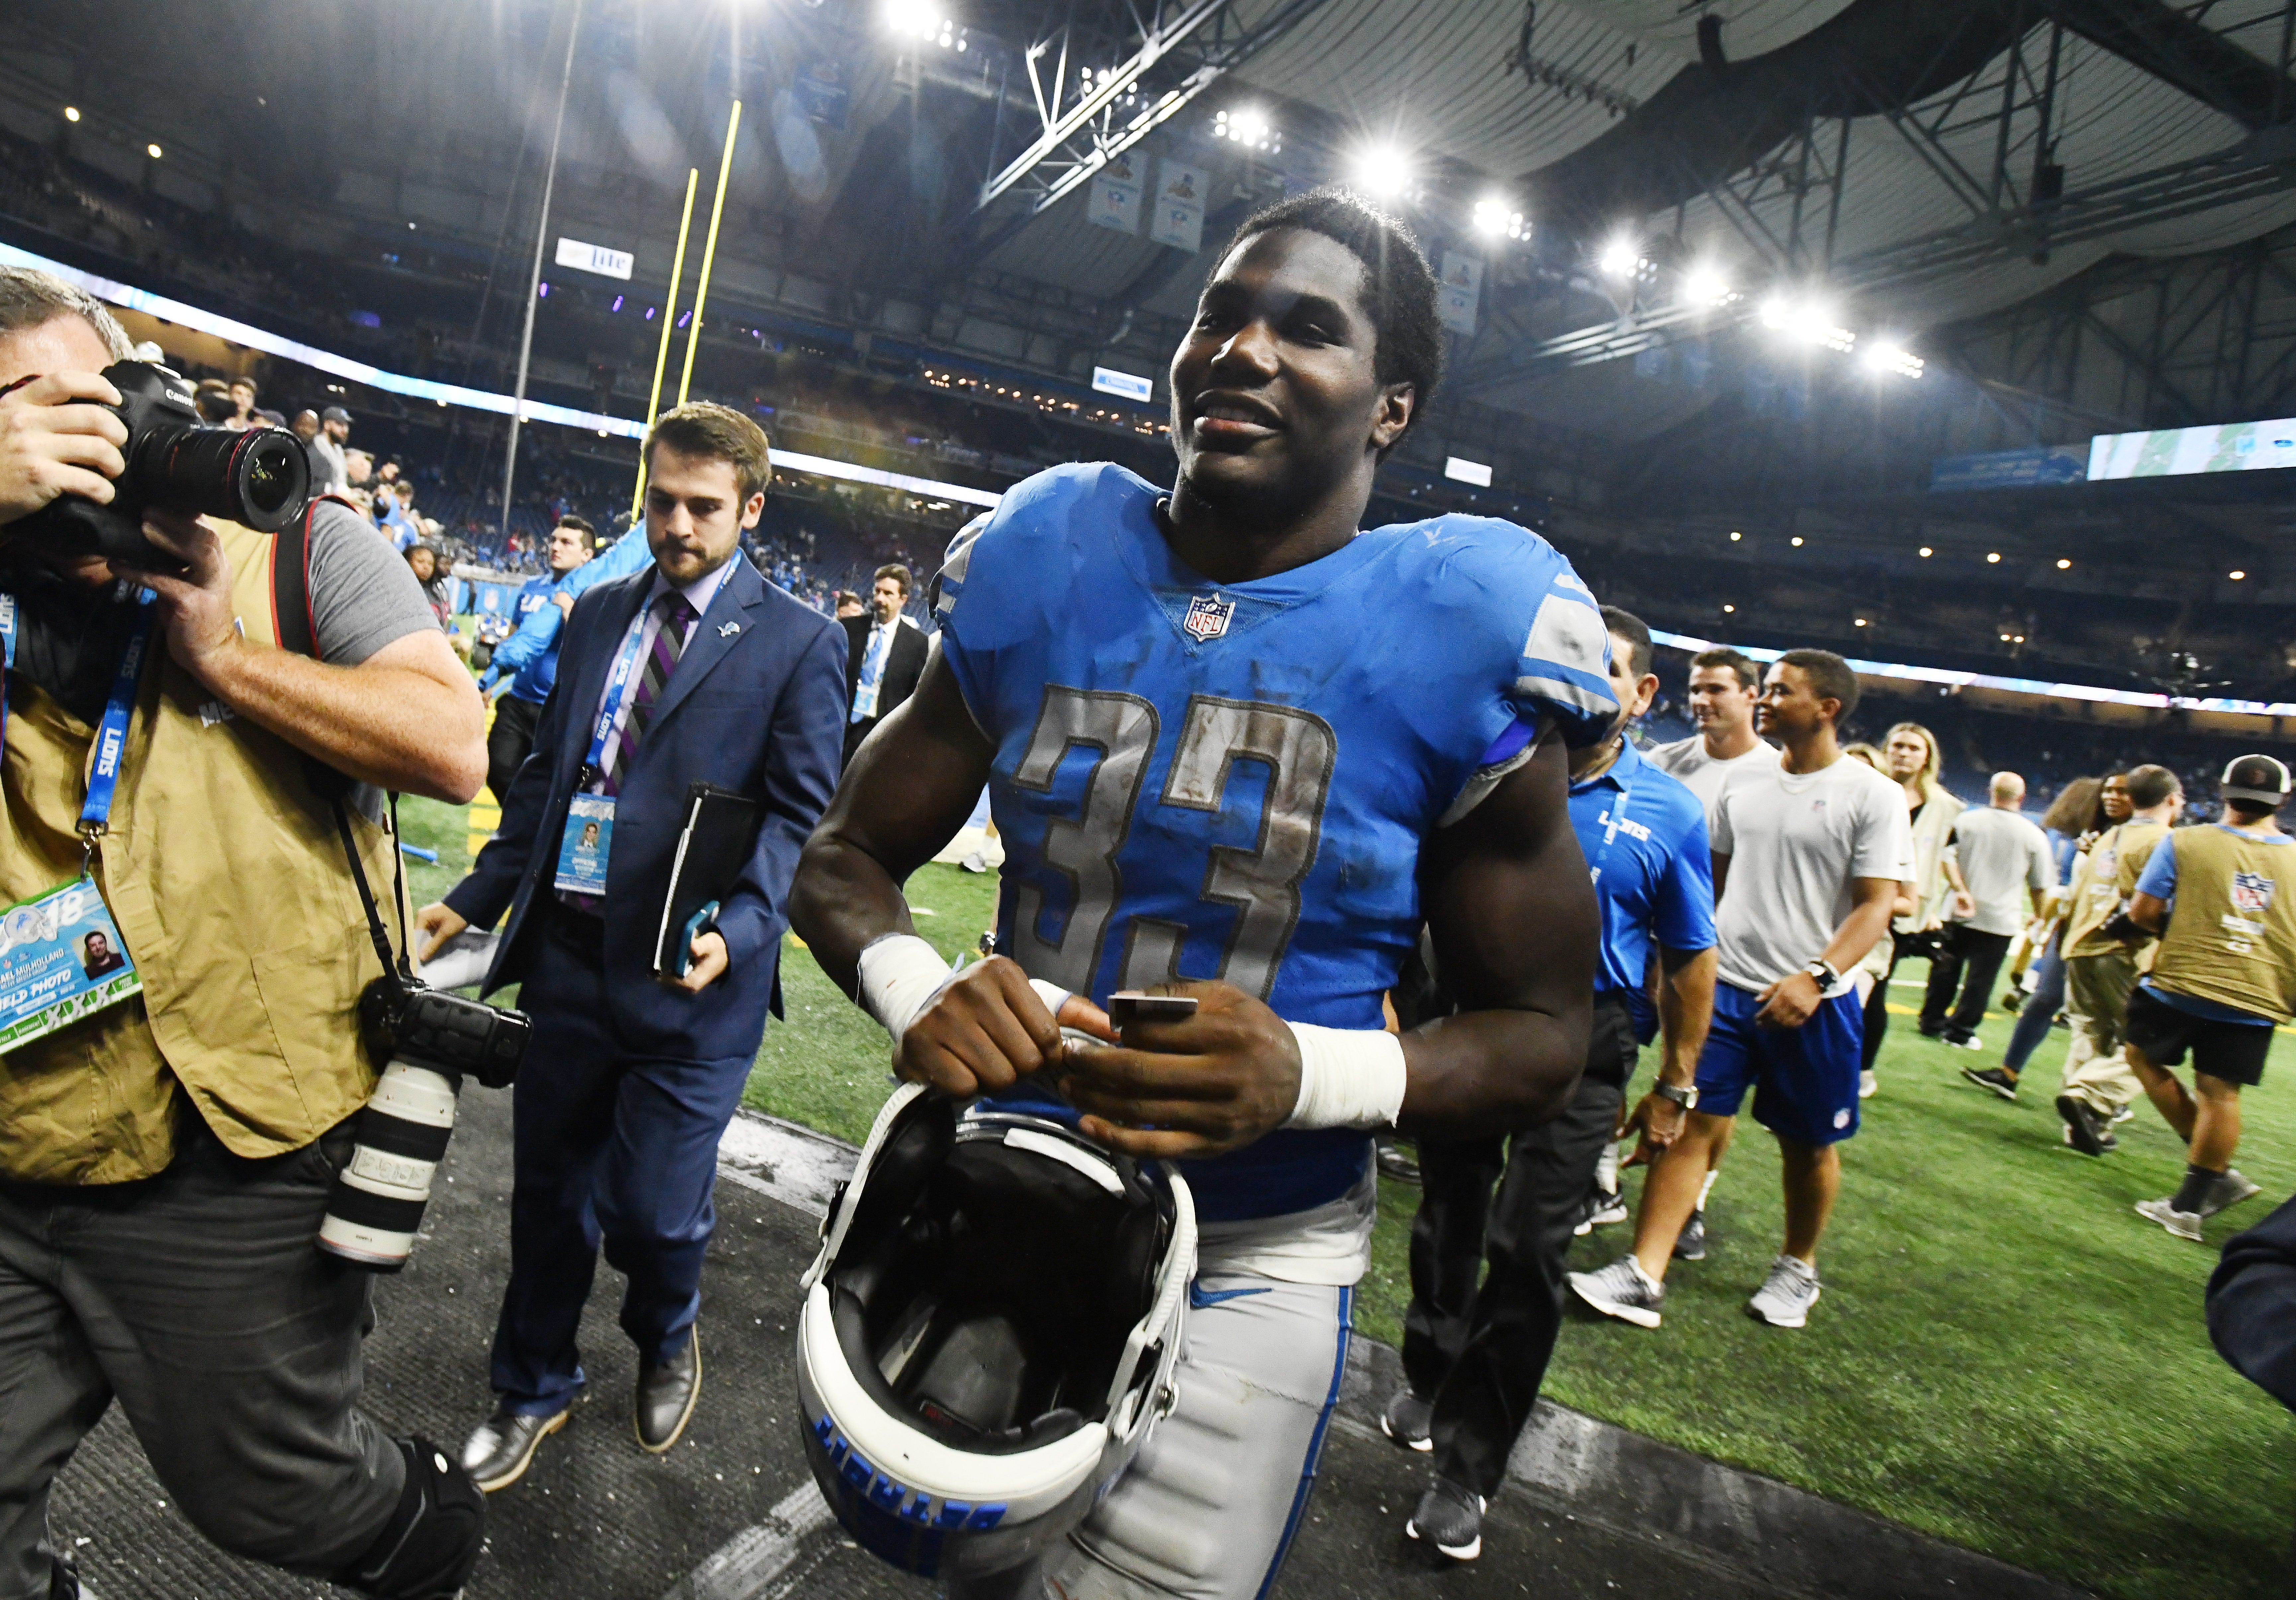 Running back Kerryon Johnson, leaving the field, ends the Detroit Lions ' 100-yard rusher drought at 70 games in the 26-10 victory over the Patriots.